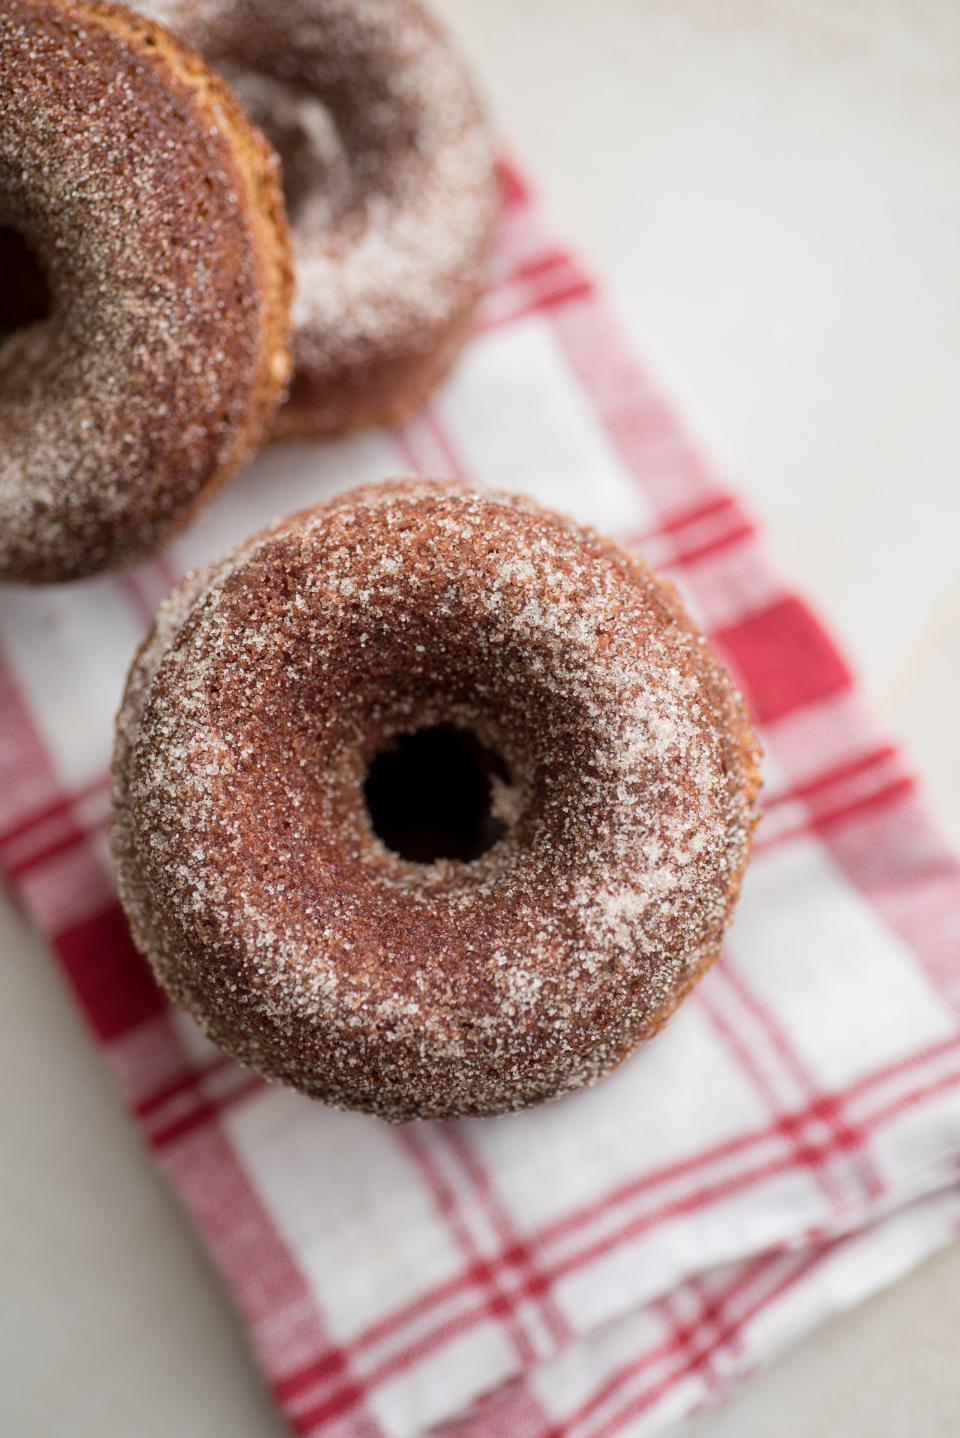 Apple Cider Doughnuts are baked, not fried.